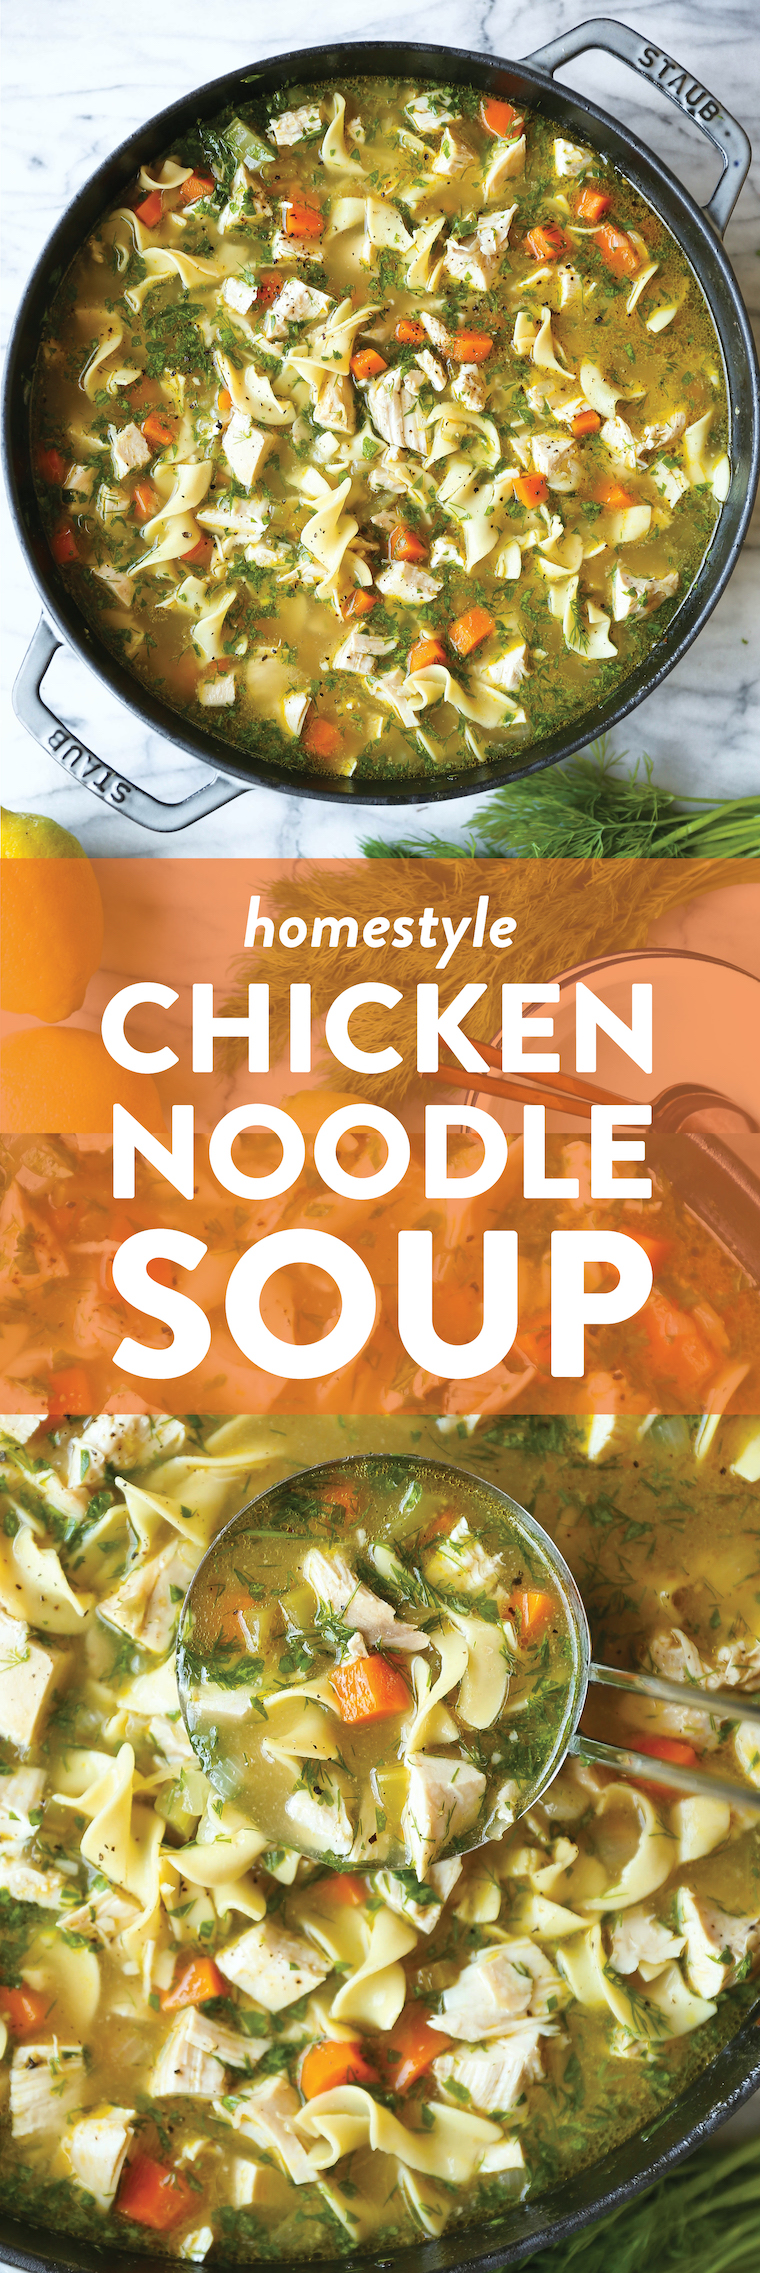 Homestyle Chicken Noodle Soup - Classic chicken noodle soup that will leave you feeling so good, so warm, so cozy. Perfect for sick days and cold nights!!!